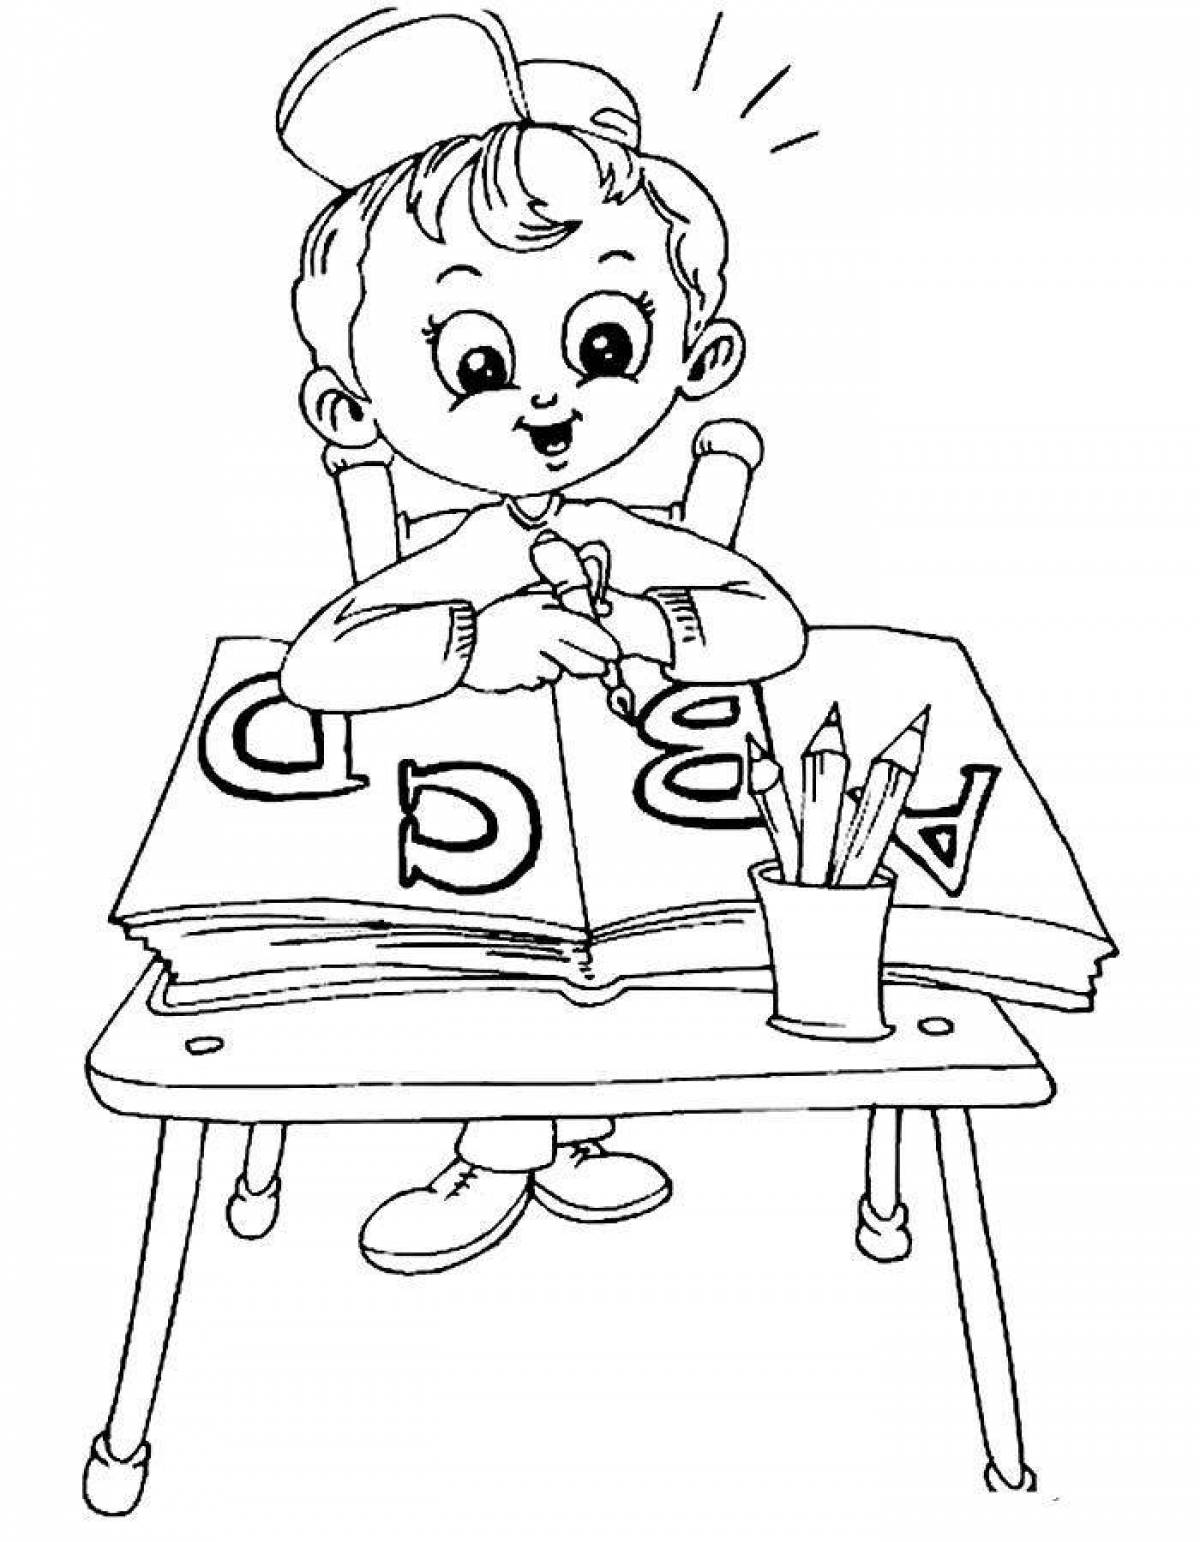 Student coloring page